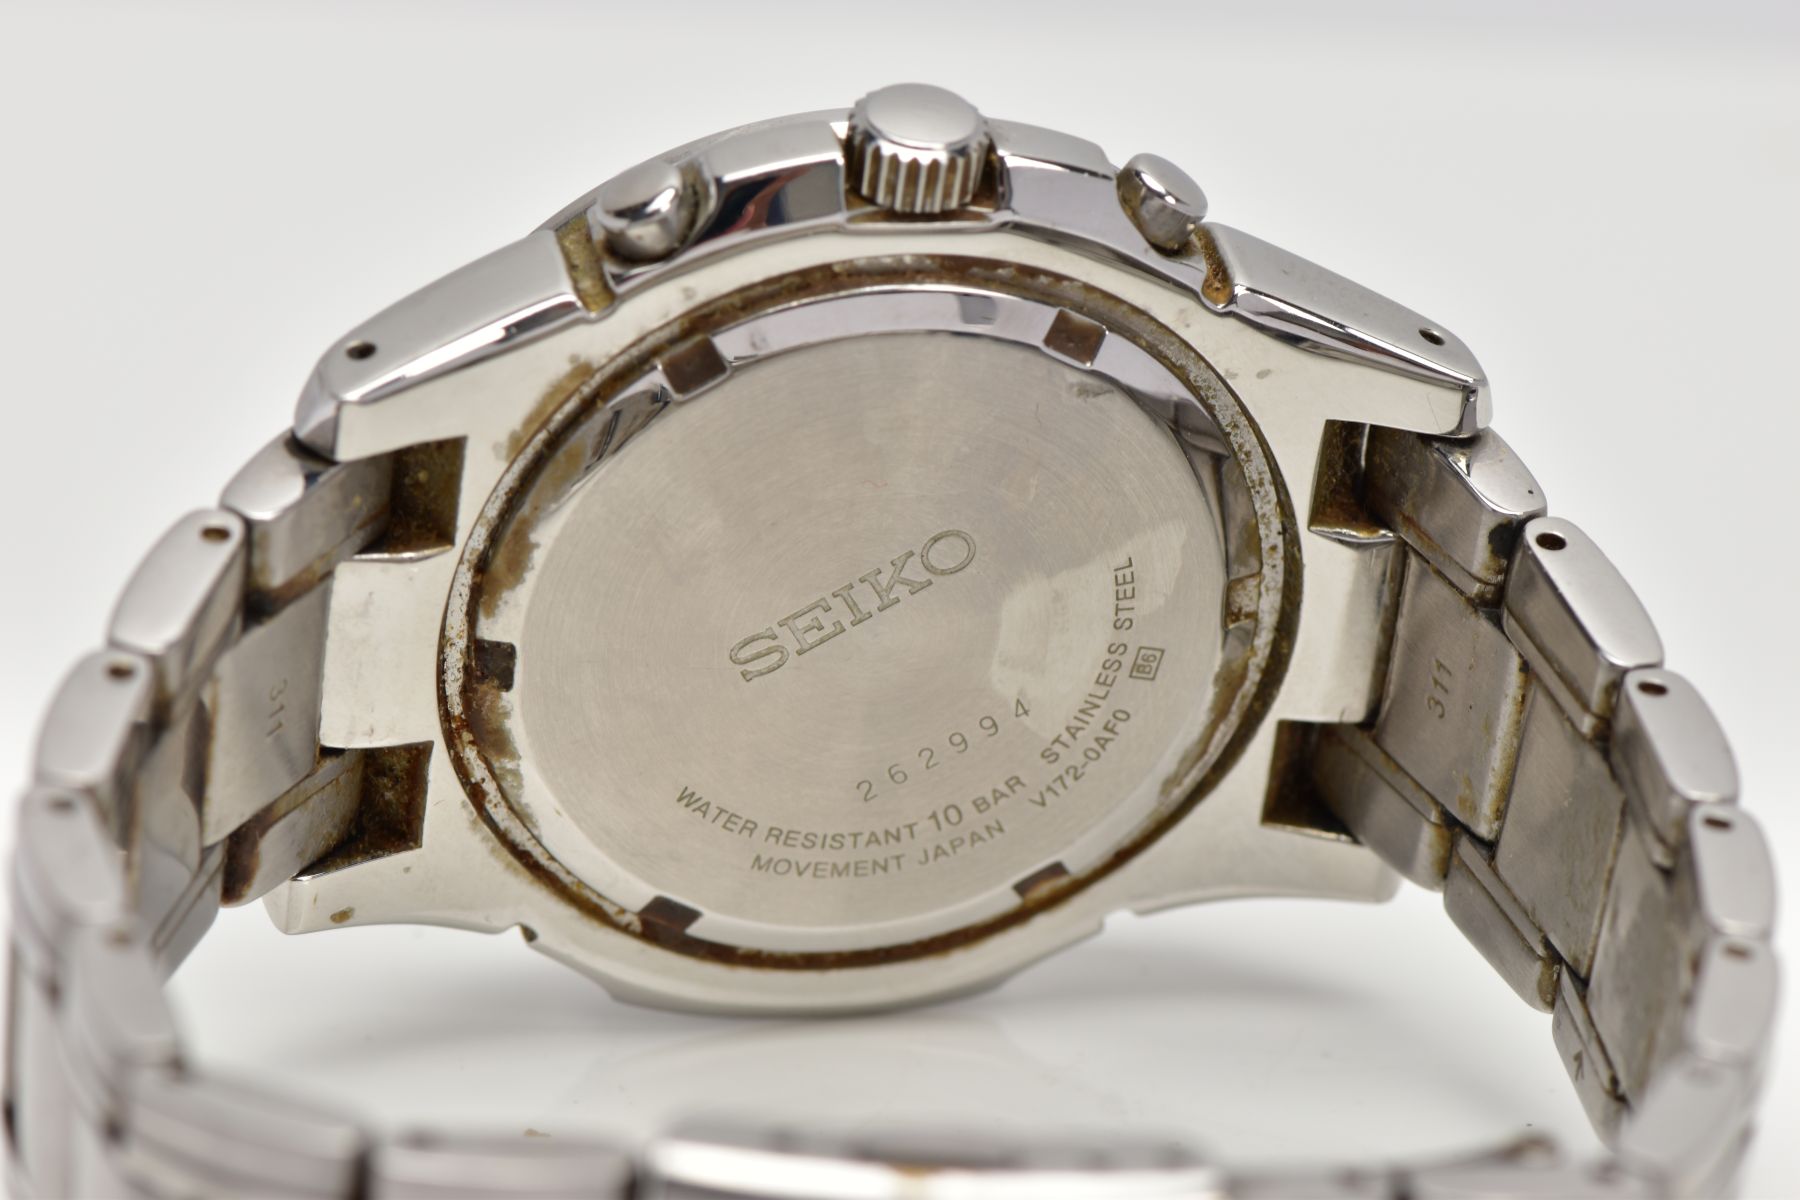 A SEIKO SOLAR CHRONOGRAPH ALARM STAINLESS STEEL WRISTWATCH, silvered dial with black subsidiary - Image 6 of 6